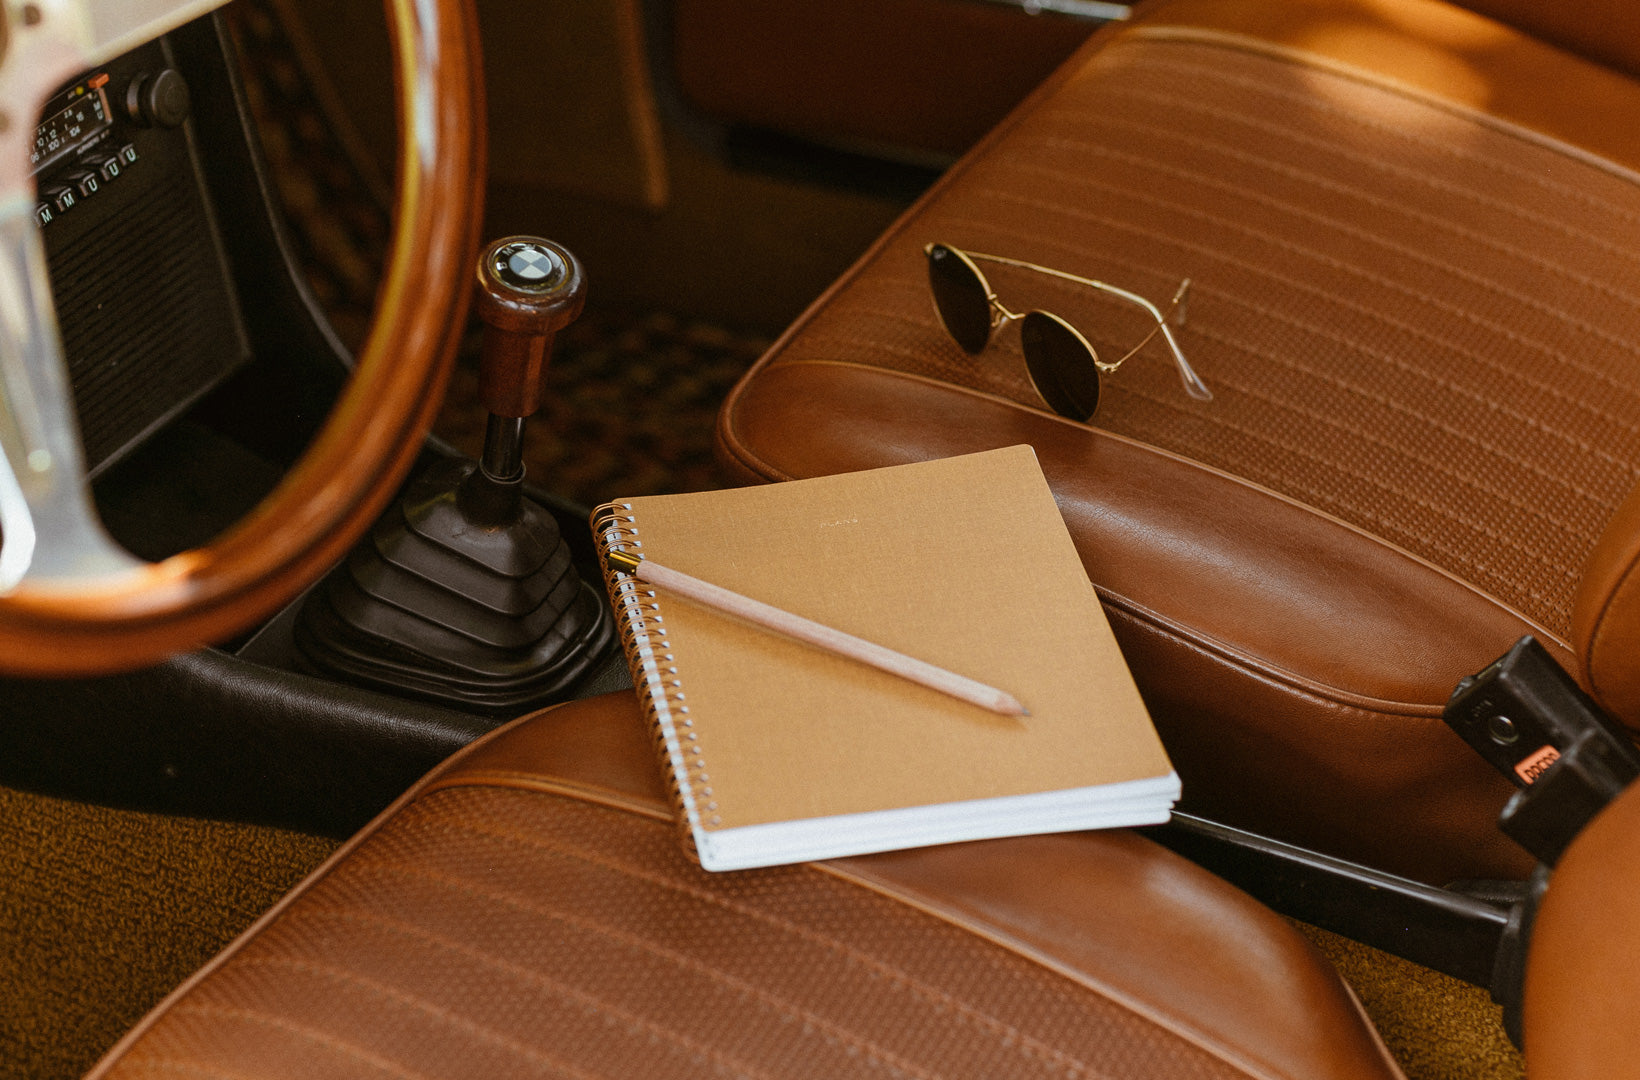 The Appointed Vision Journal, a light brown bookcloth journal with brass binding, sits on the front set of a cart with brown leather seats and a leather steering wheel.